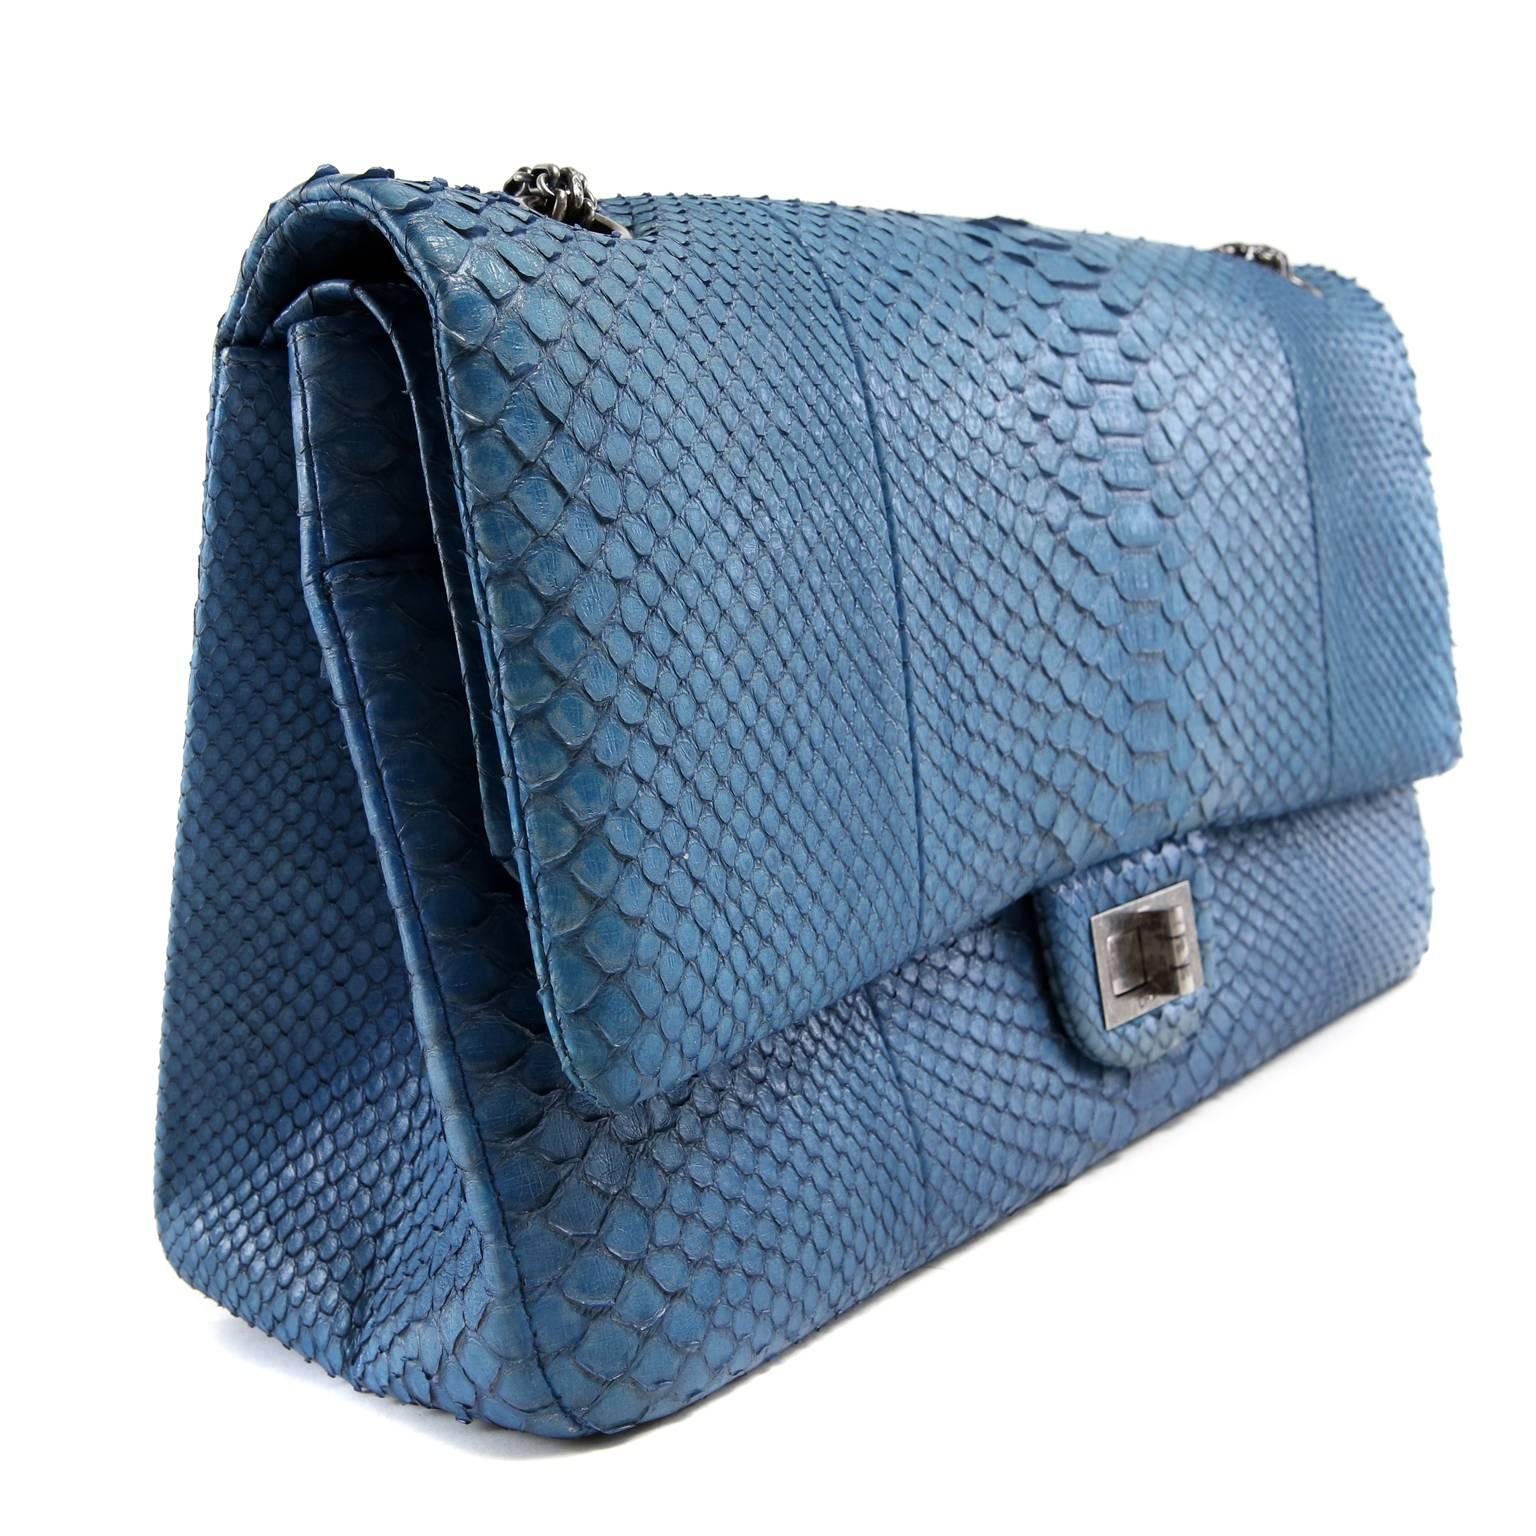 Chanel Blue Python Reissue Double Flap- PRISTINE
  The stunning exotic skin is highlighted perfectly with ruthenium hardware.  This is a must have piece for any collection. 
 
Glorious blue python has grey striations and outlines each scale